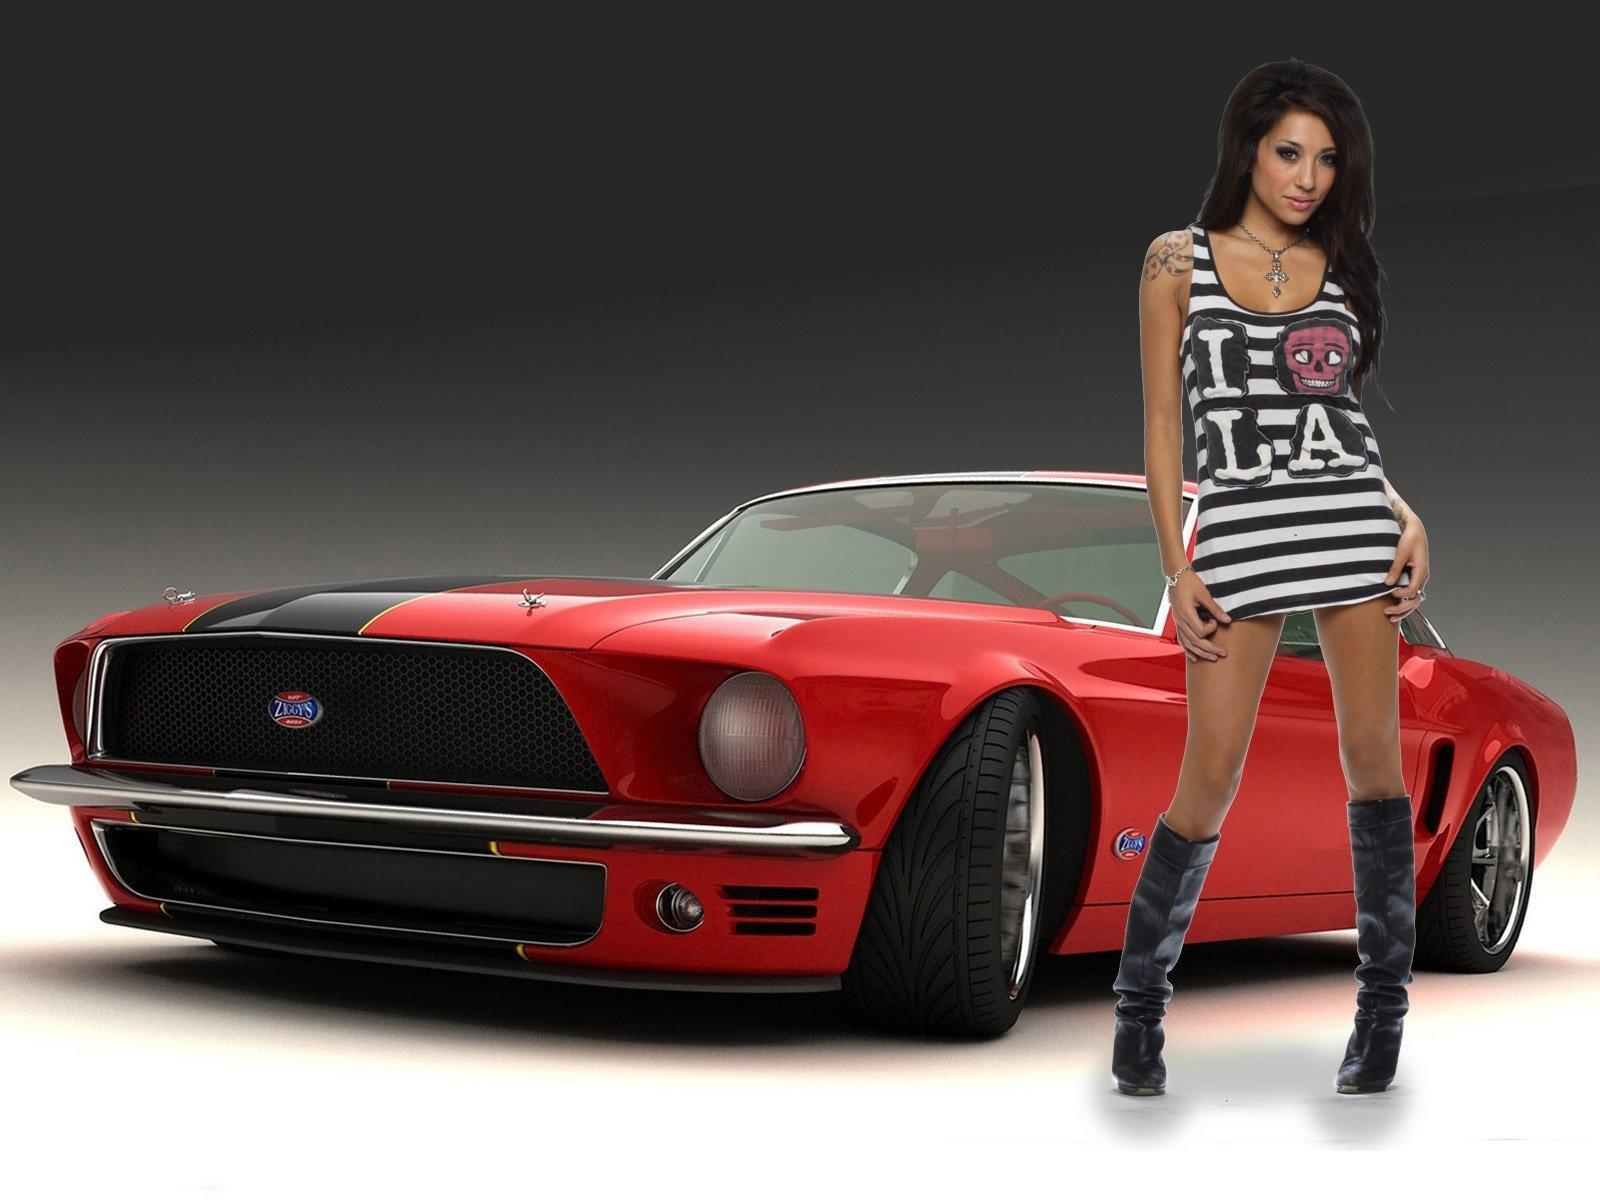 American Muscle Car Wallpaper For Mobile